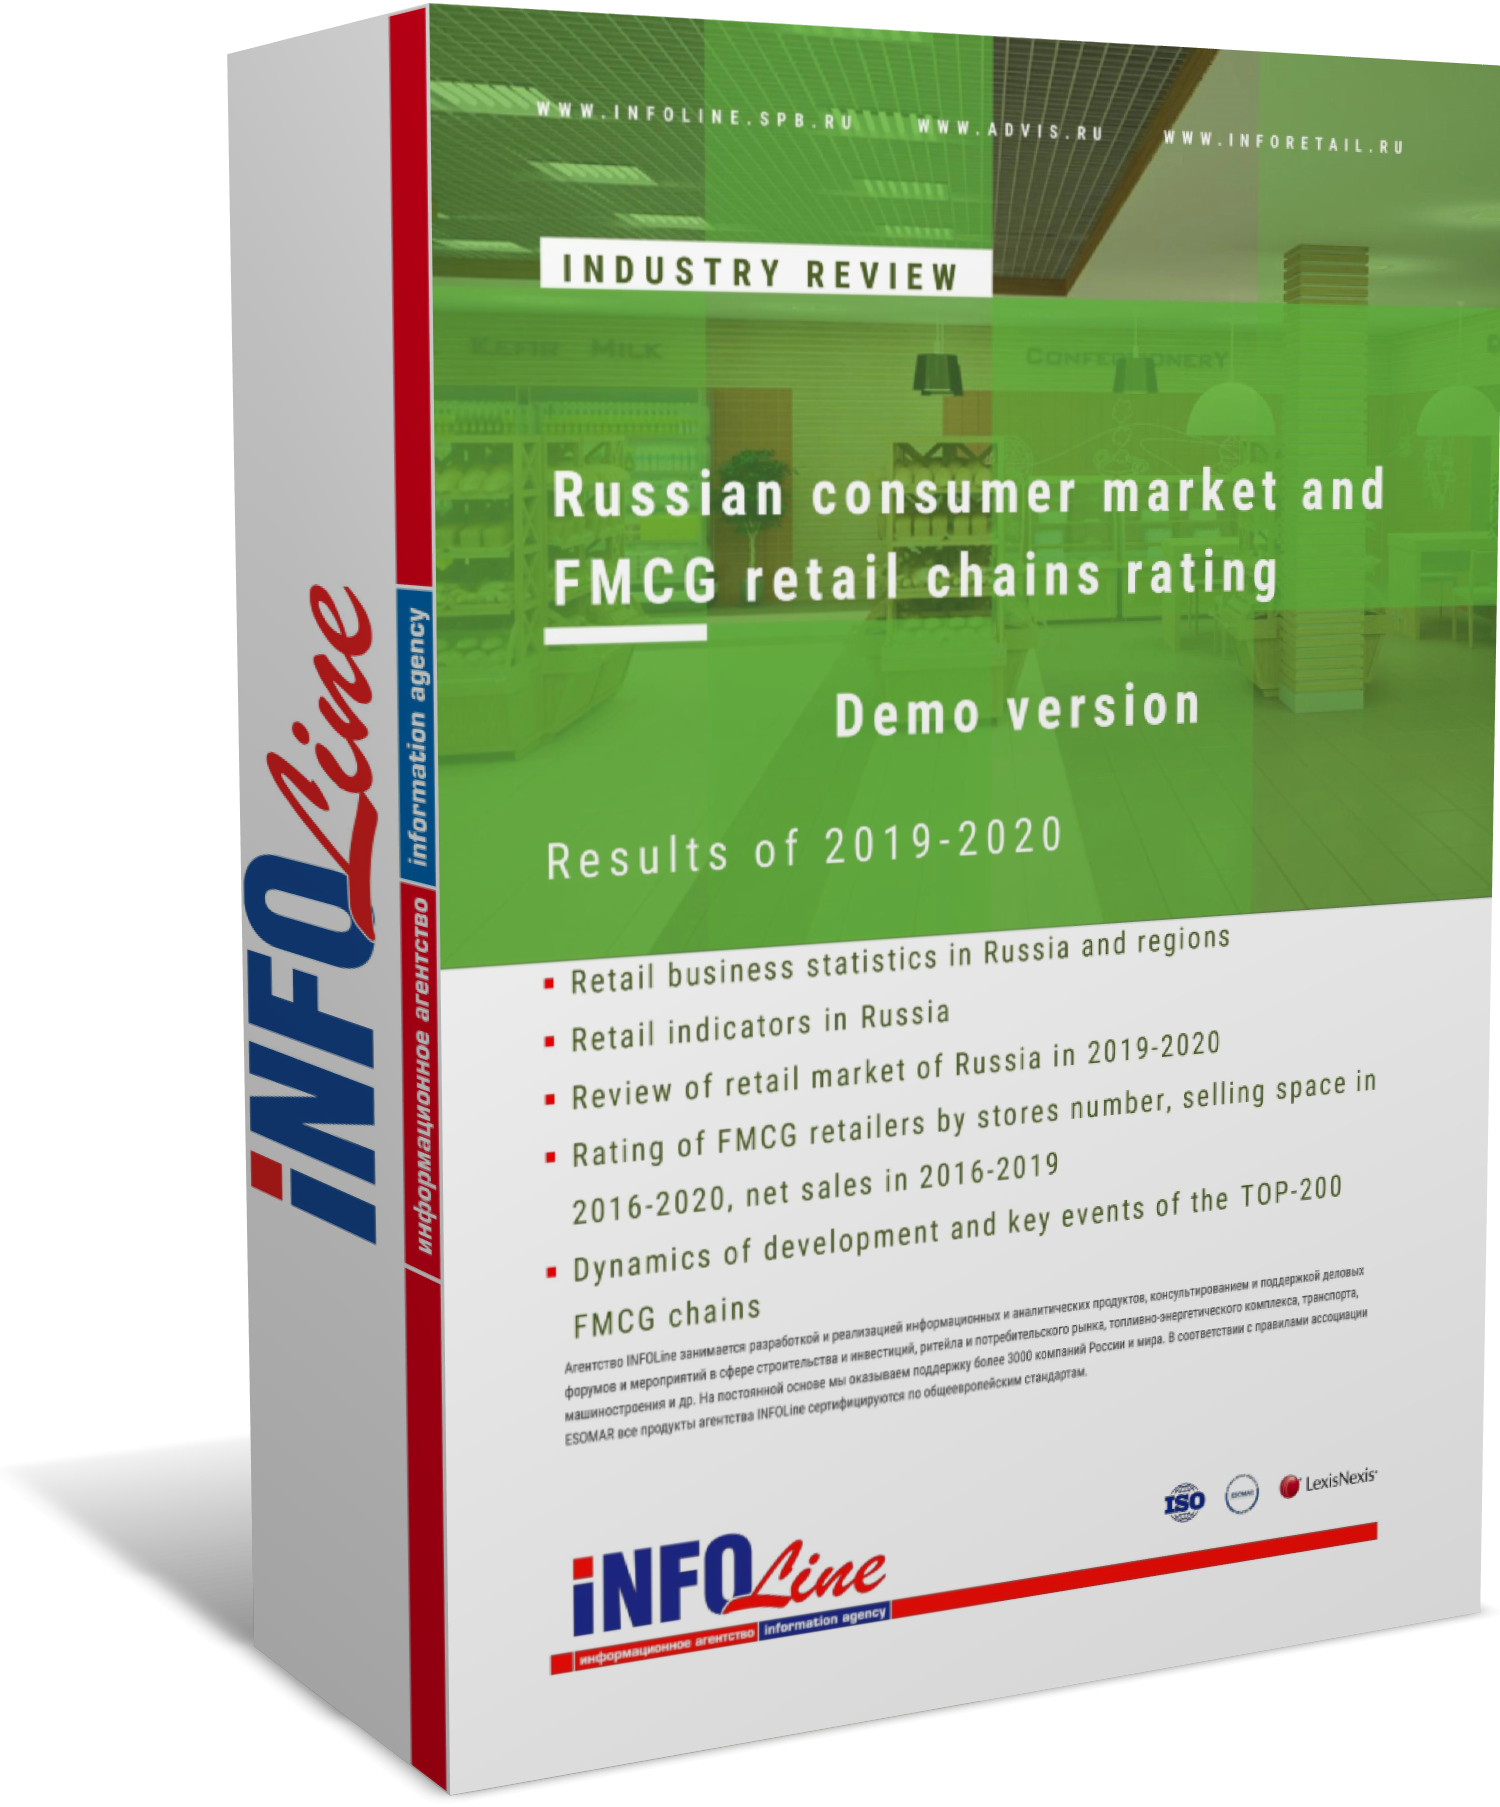 "Russian consumer market and FMCG retail chains rating: Results of 2019-2020" (доступна обновленная версия)